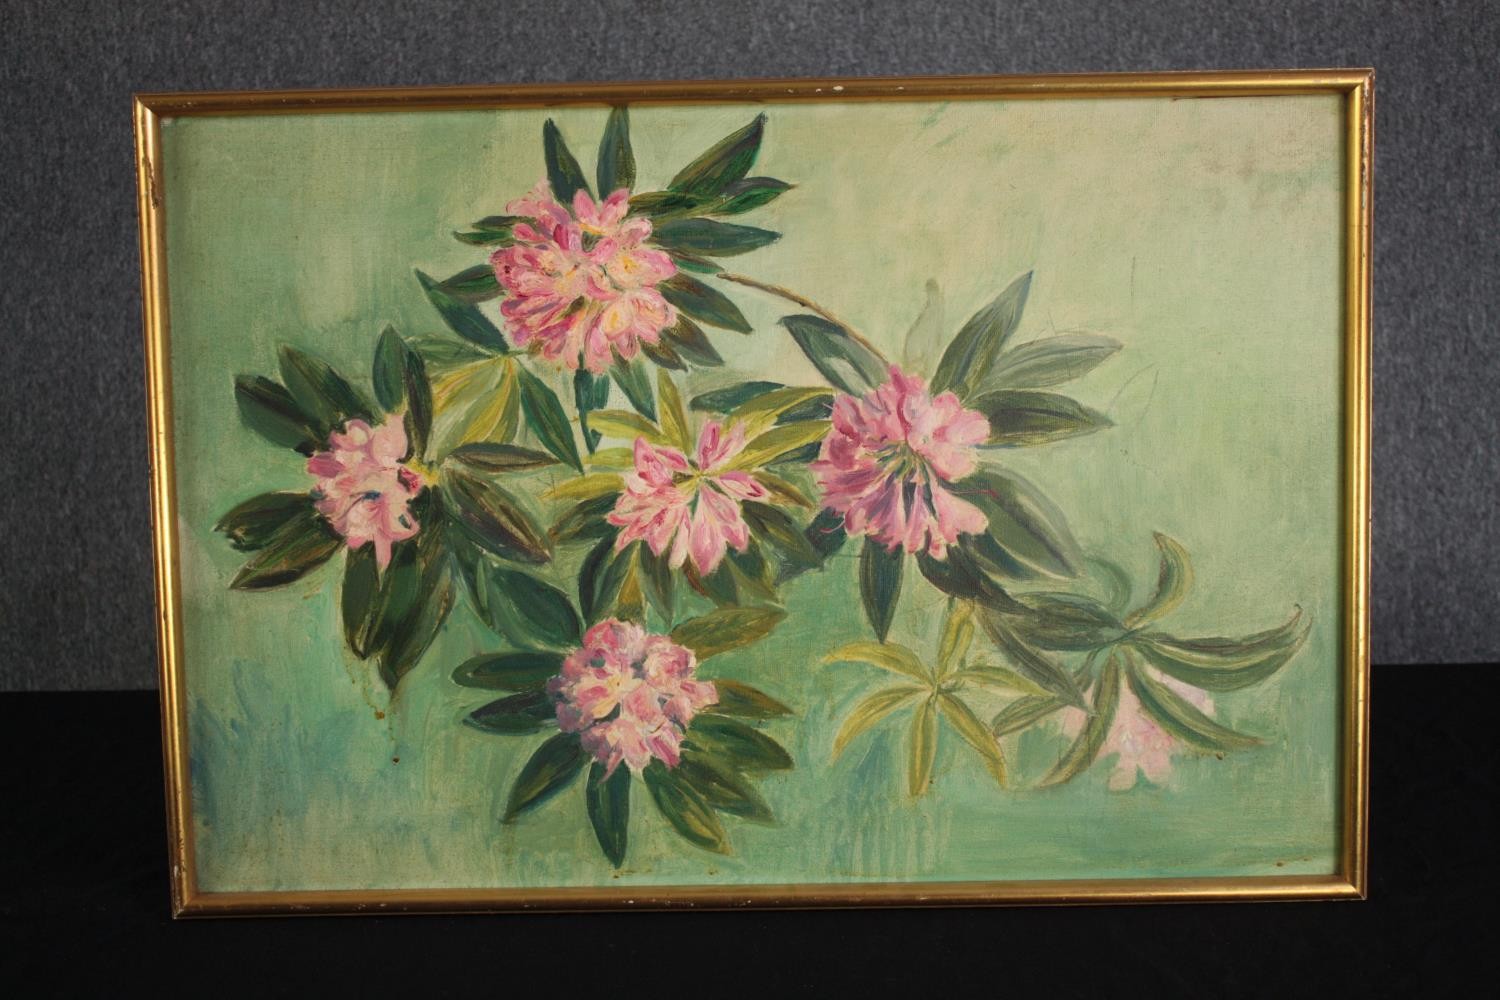 Oil painting on board. Flowers. Unsigned. Framed. H.52 W.76 cm. - Image 2 of 3